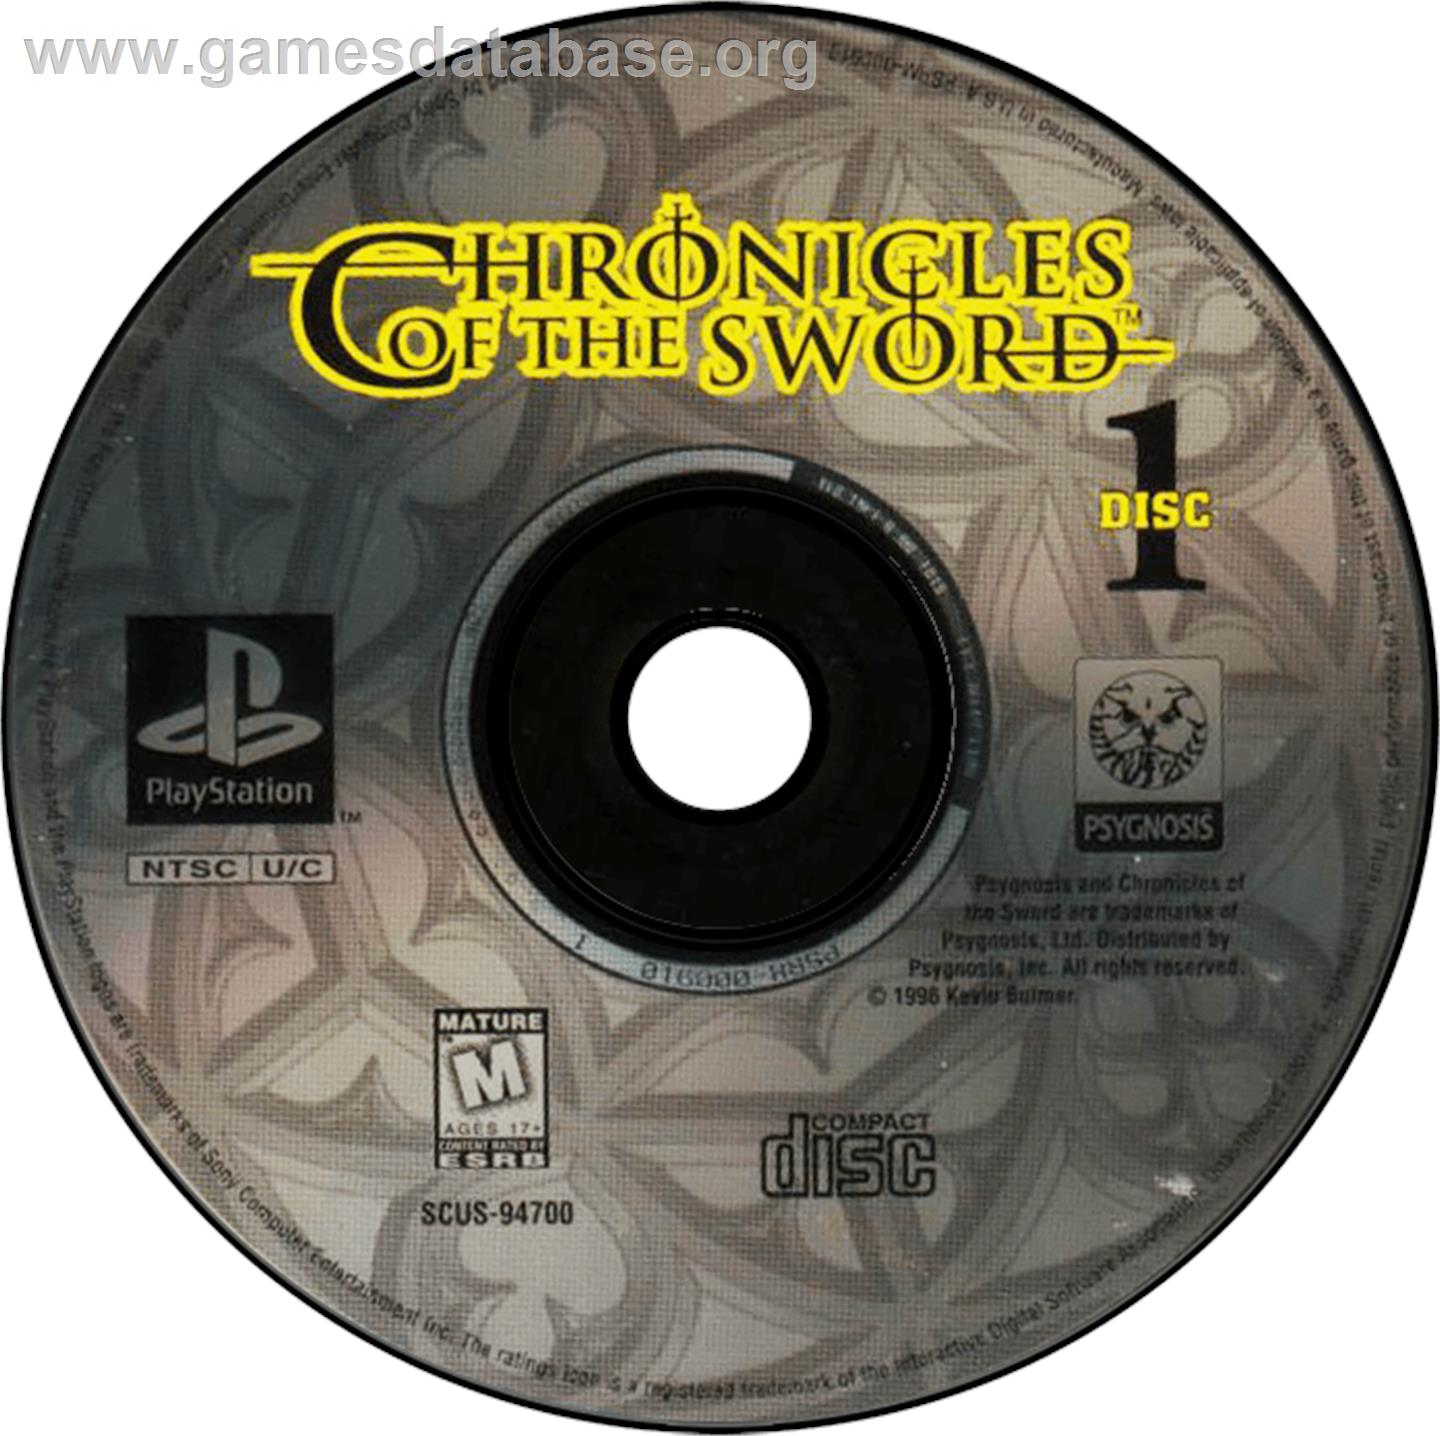 Chronicles of the Sword - Sony Playstation - Artwork - Disc